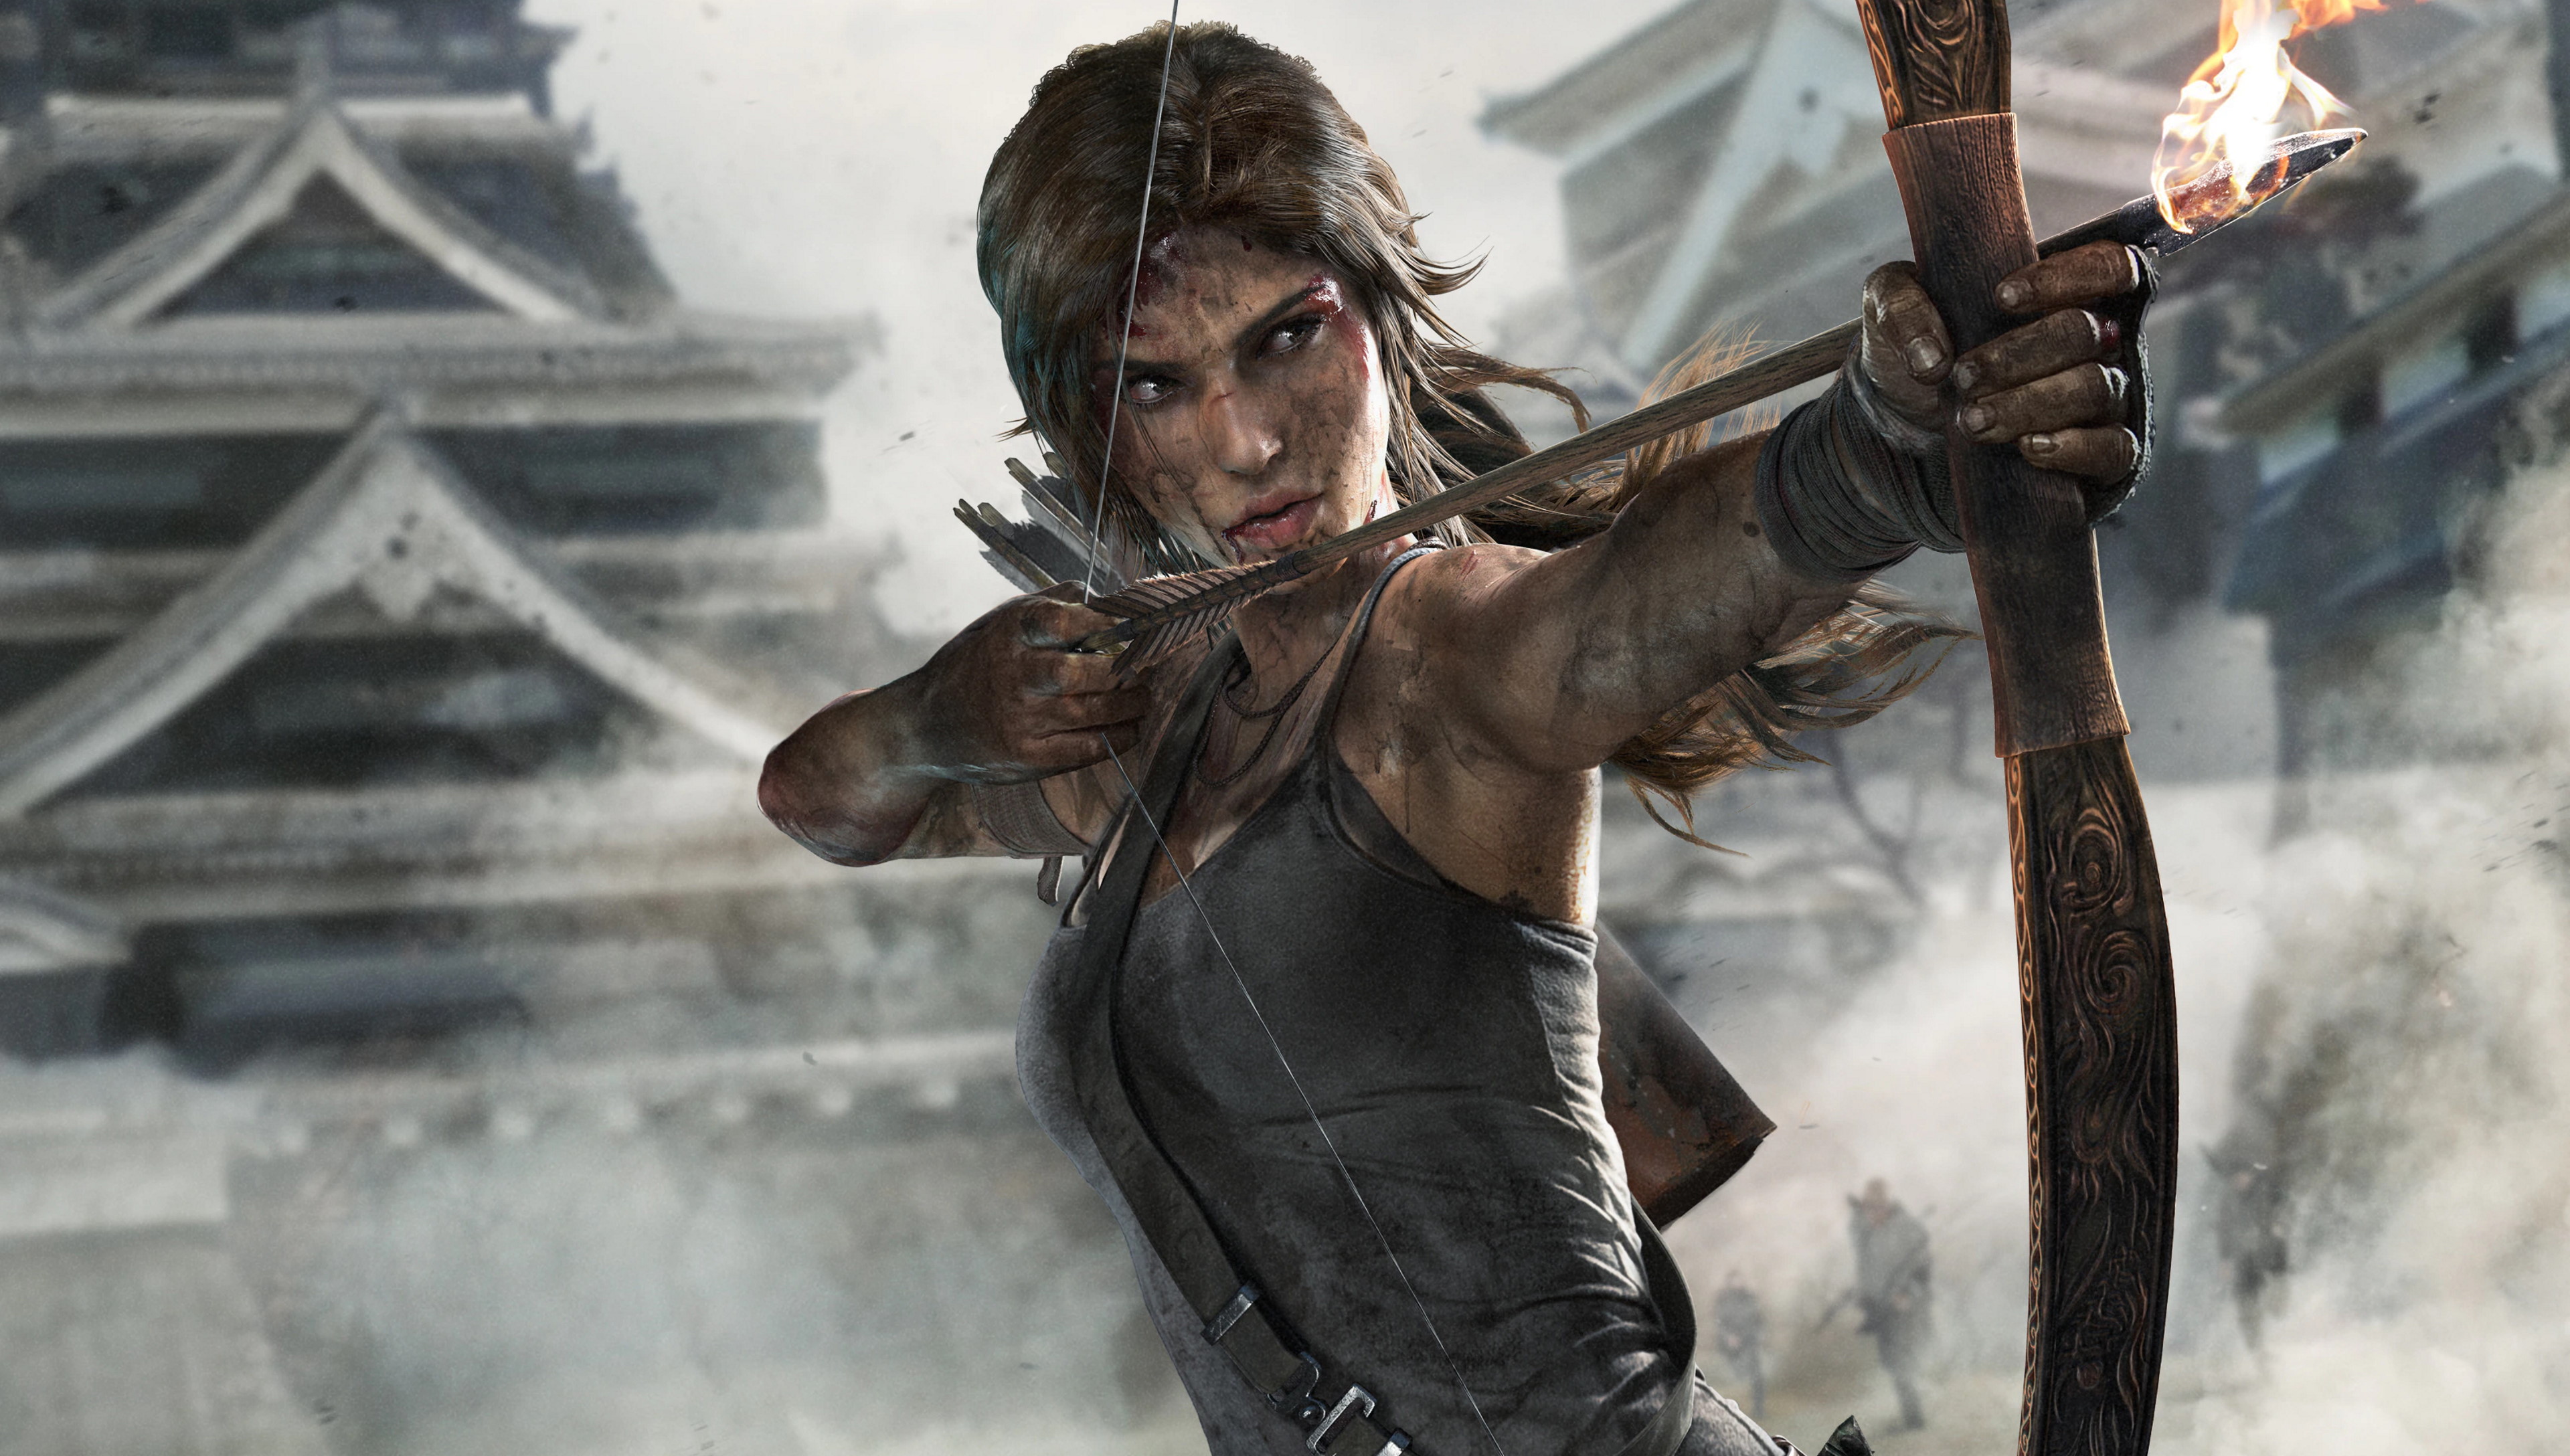  Tomb Raider is the next videogame-based series coming to Prime 